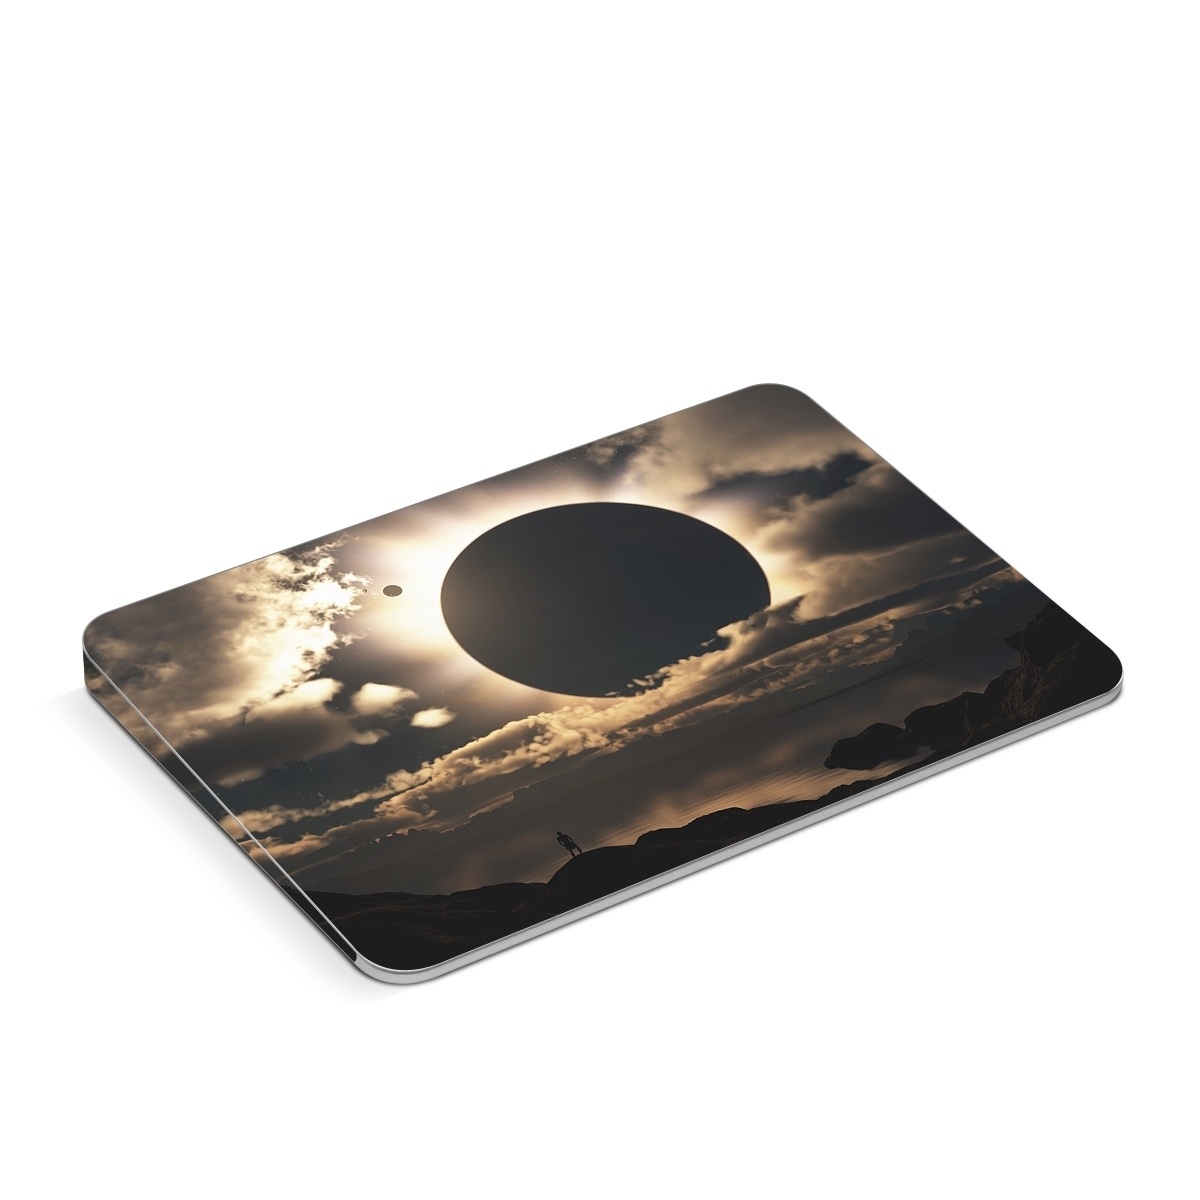 Apple Magic Trackpad Skin design of Sky, Cloud, Daytime, Eclipse, Atmosphere, Cumulus, Sunlight, Sun, Astronomical object, Celestial event, with black, red, green, gray, pink, yellow colors